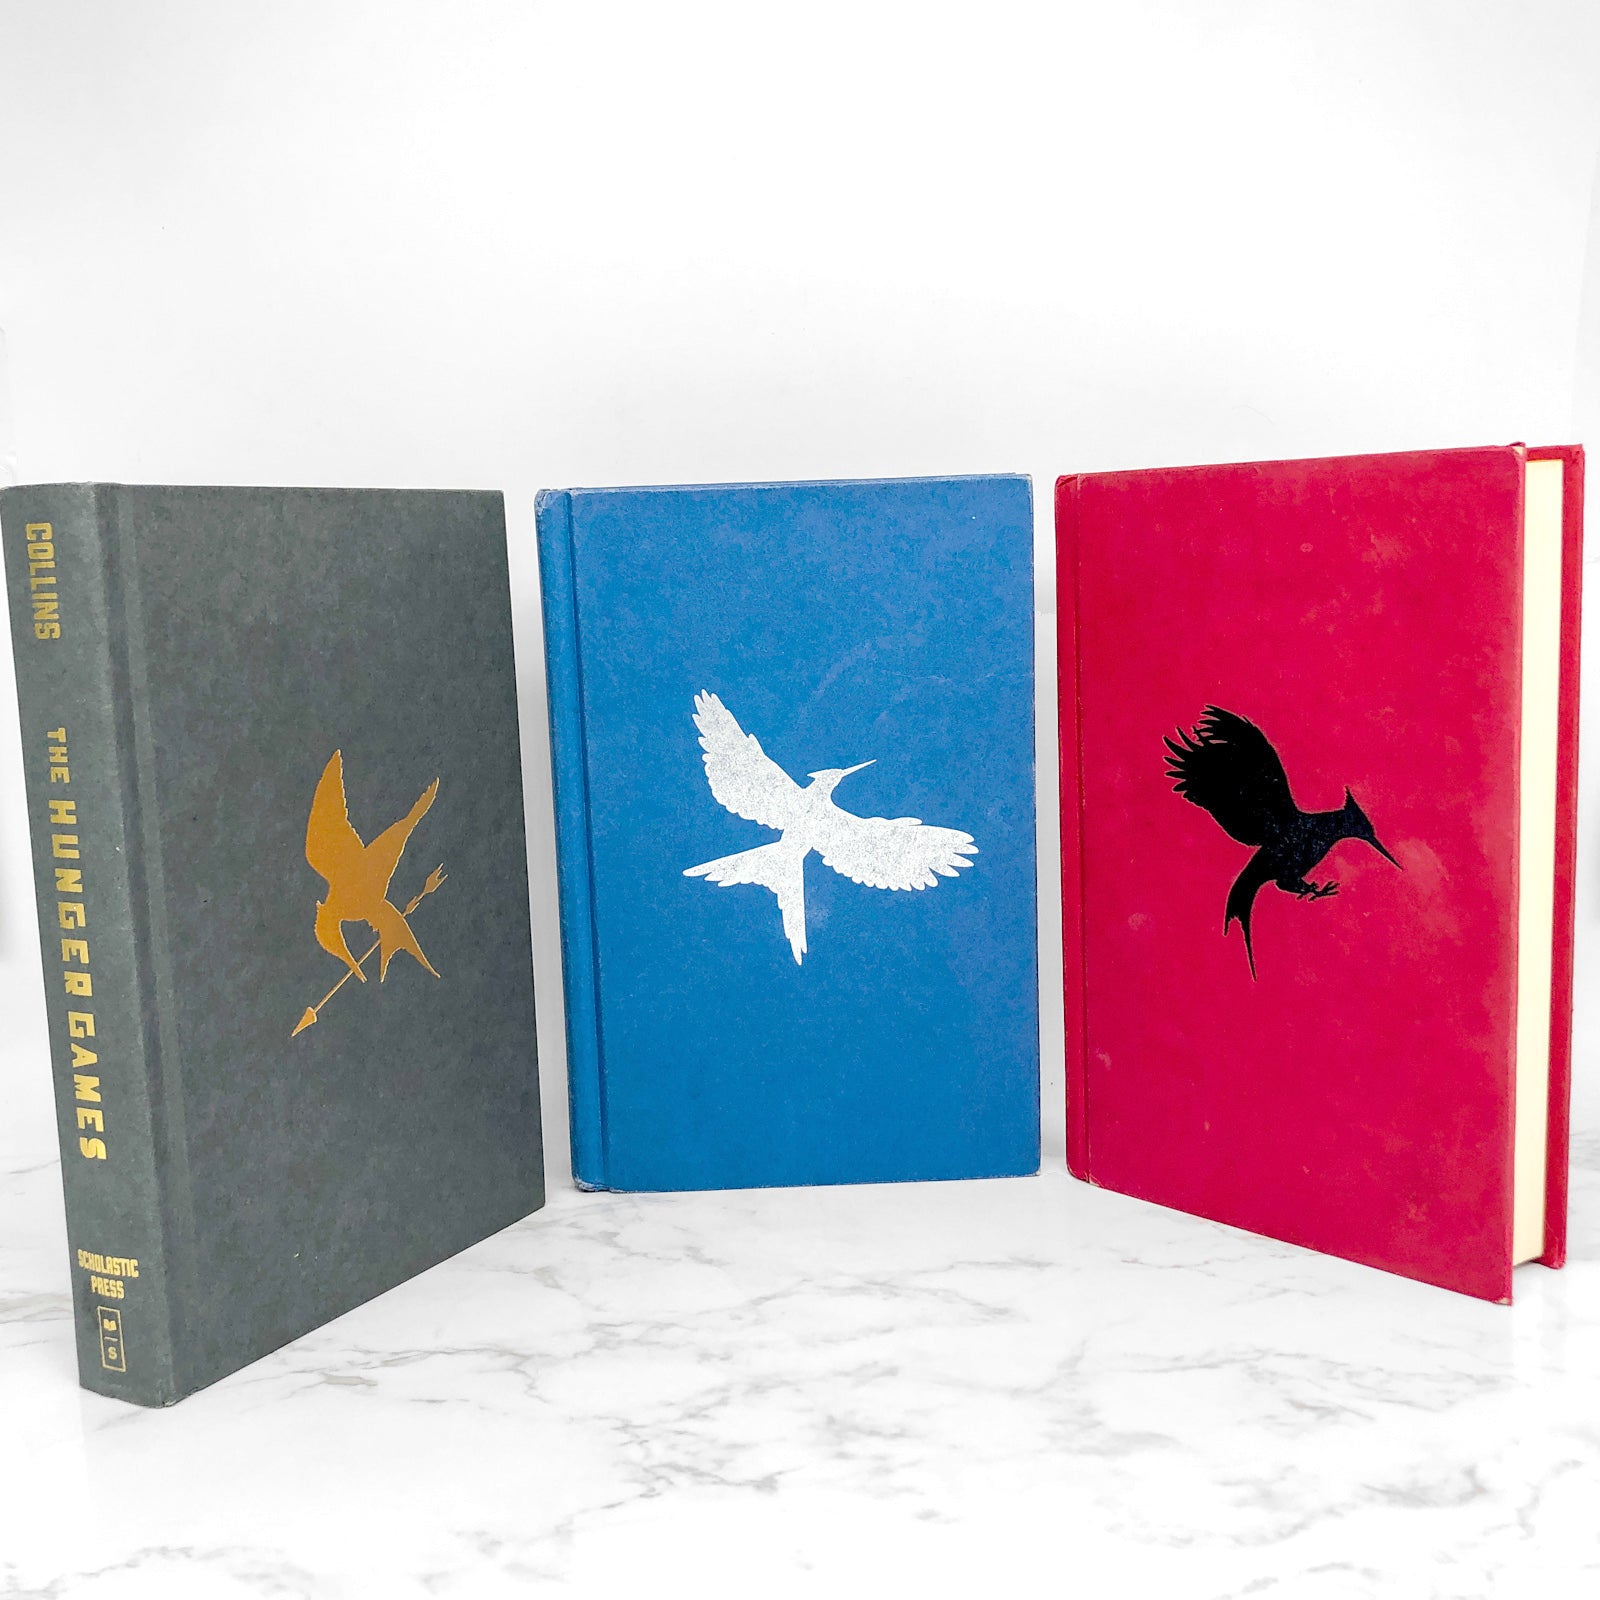 Hunger Games 1-4 HC Box Set by Suzanne Collins